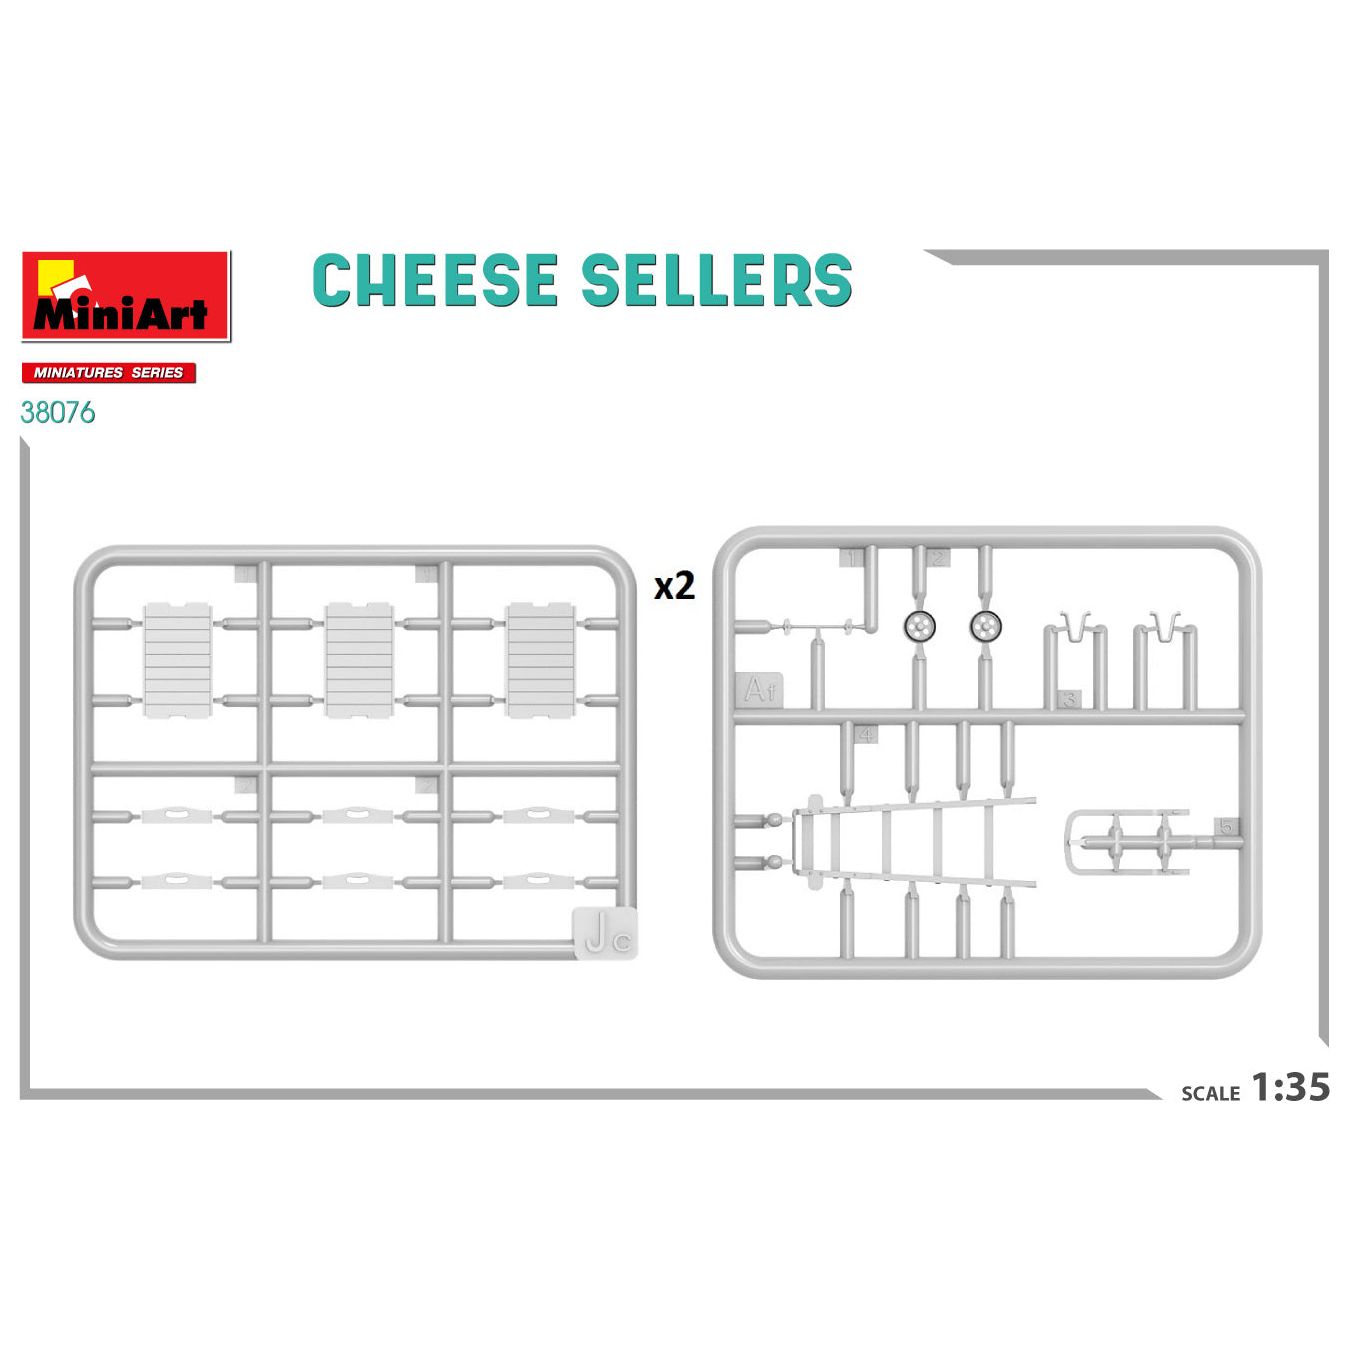 MINIART 1/35 Cheese Sellers